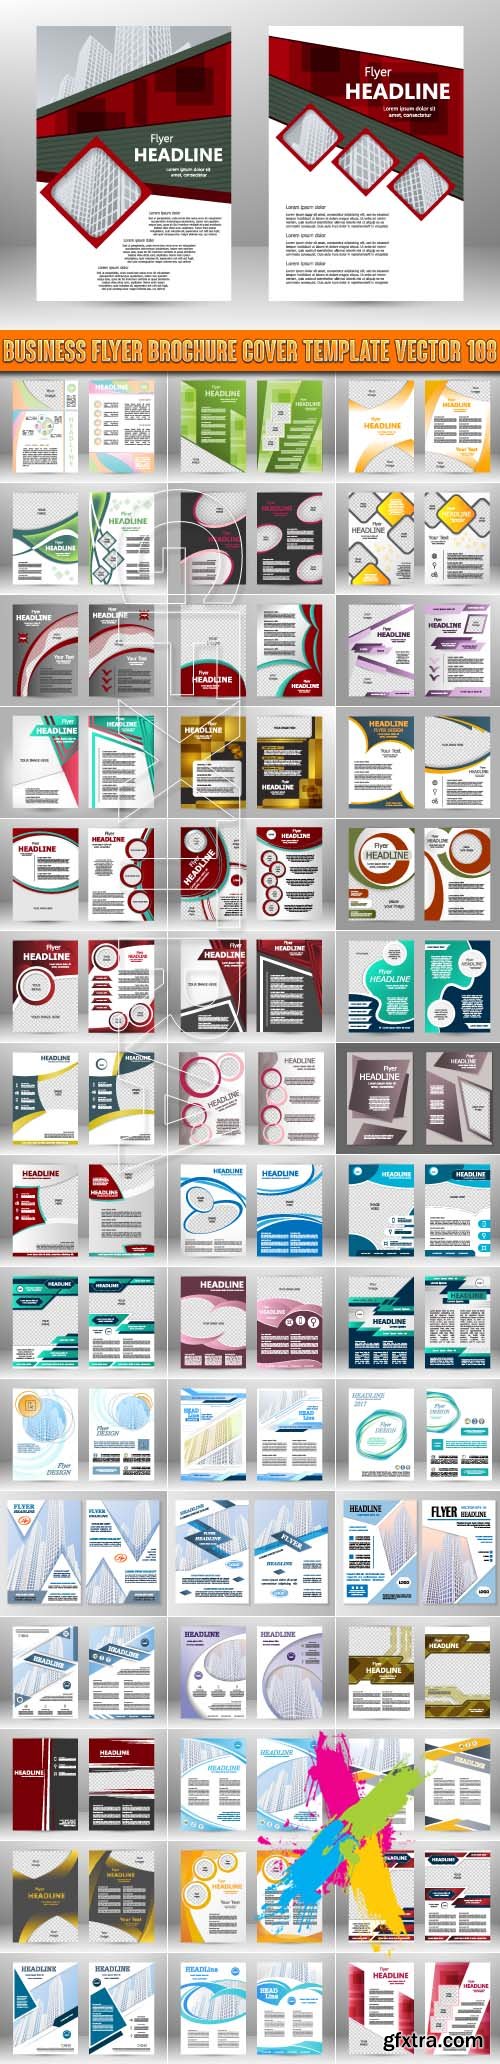 Business flyer brochure cover template vector 108